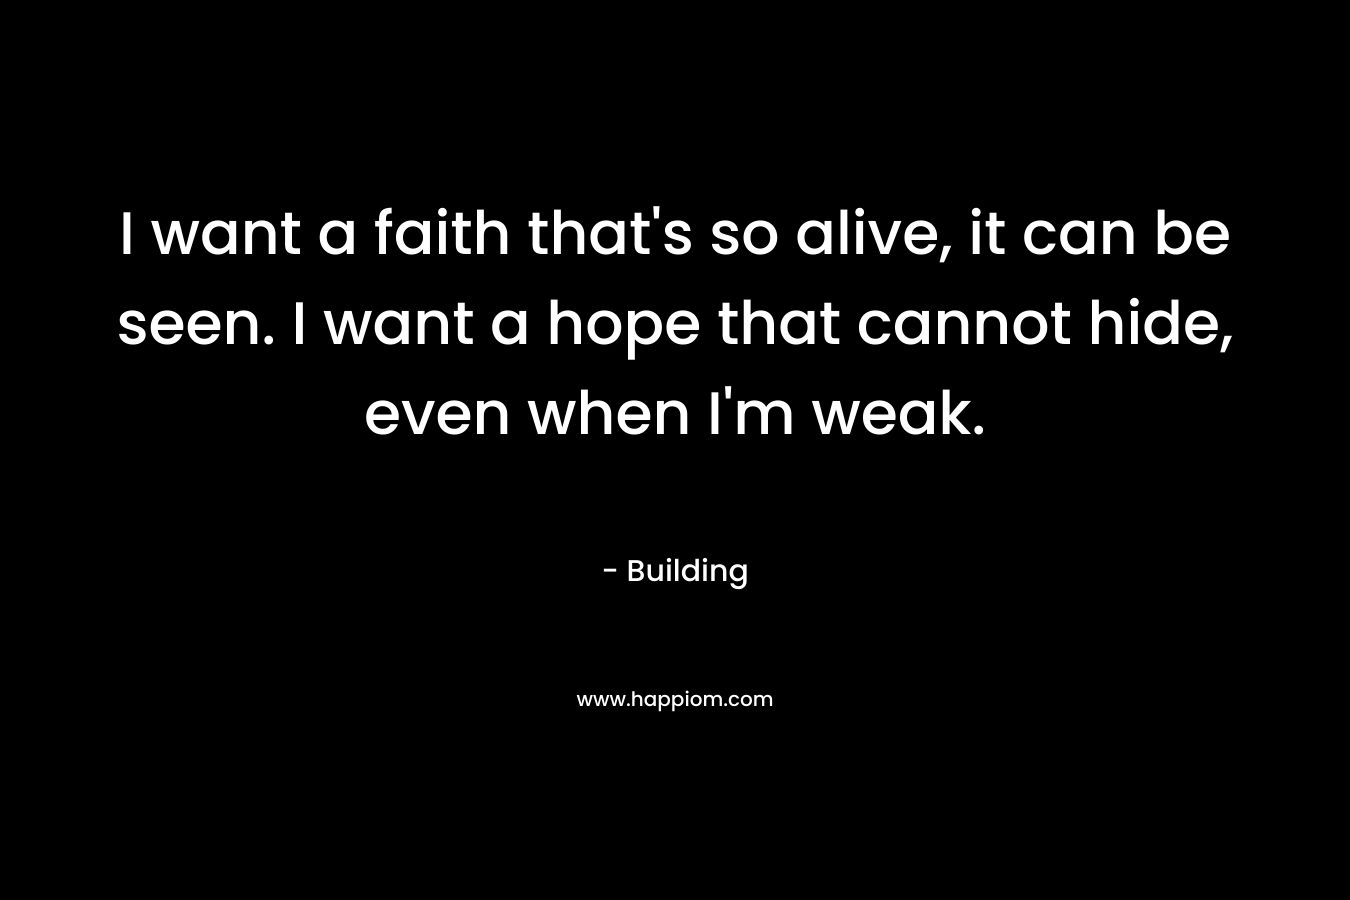 I want a faith that’s so alive, it can be seen. I want a hope that cannot hide, even when I’m weak. – Building